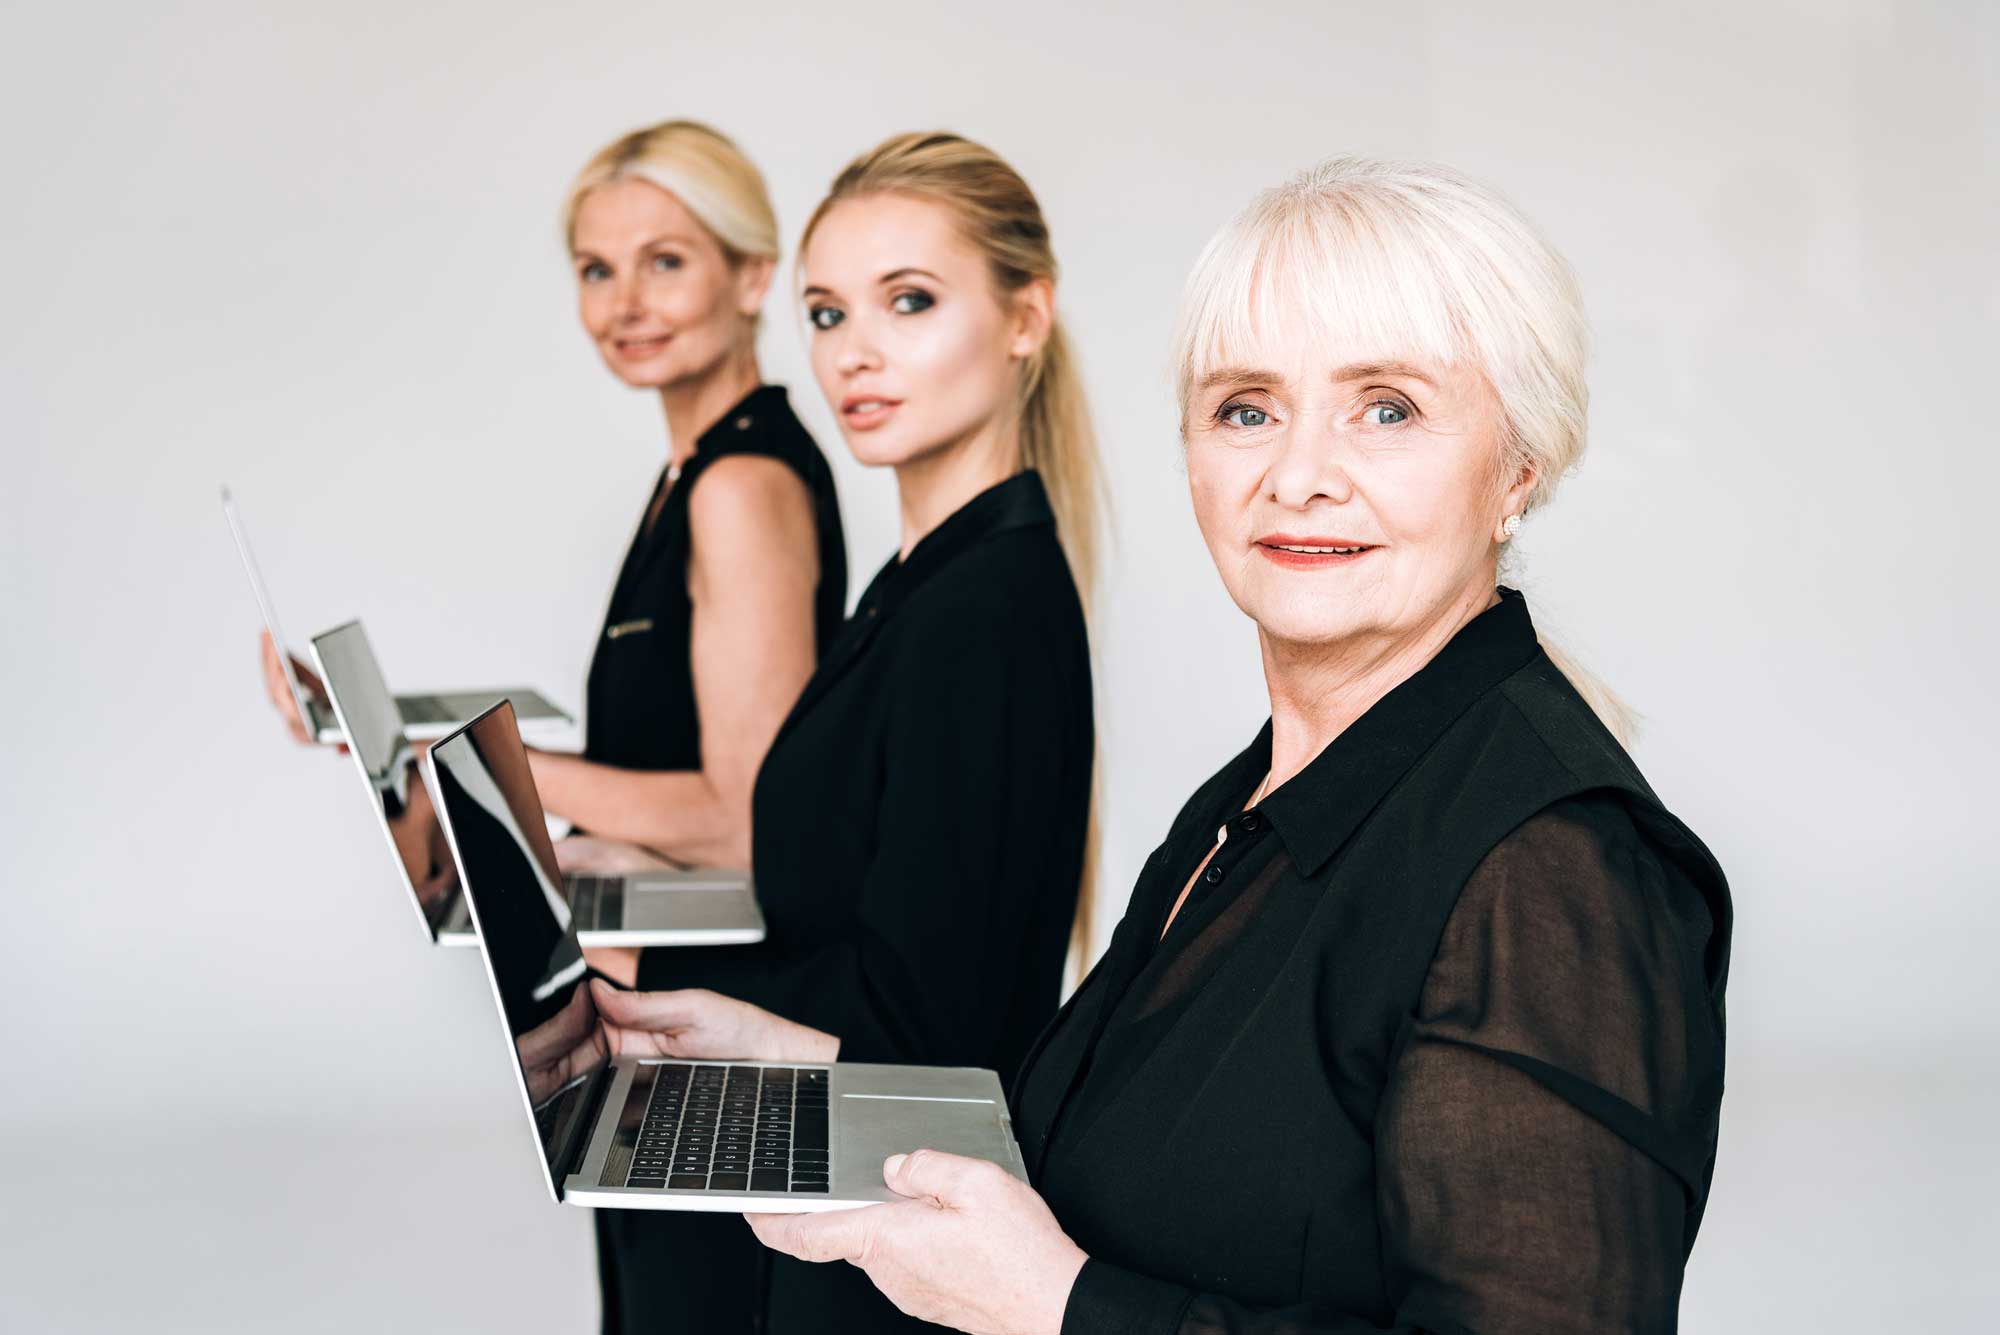 Three blonde women of different generations stand in a row holding laptops, looking over their left shoulders toward the camera.